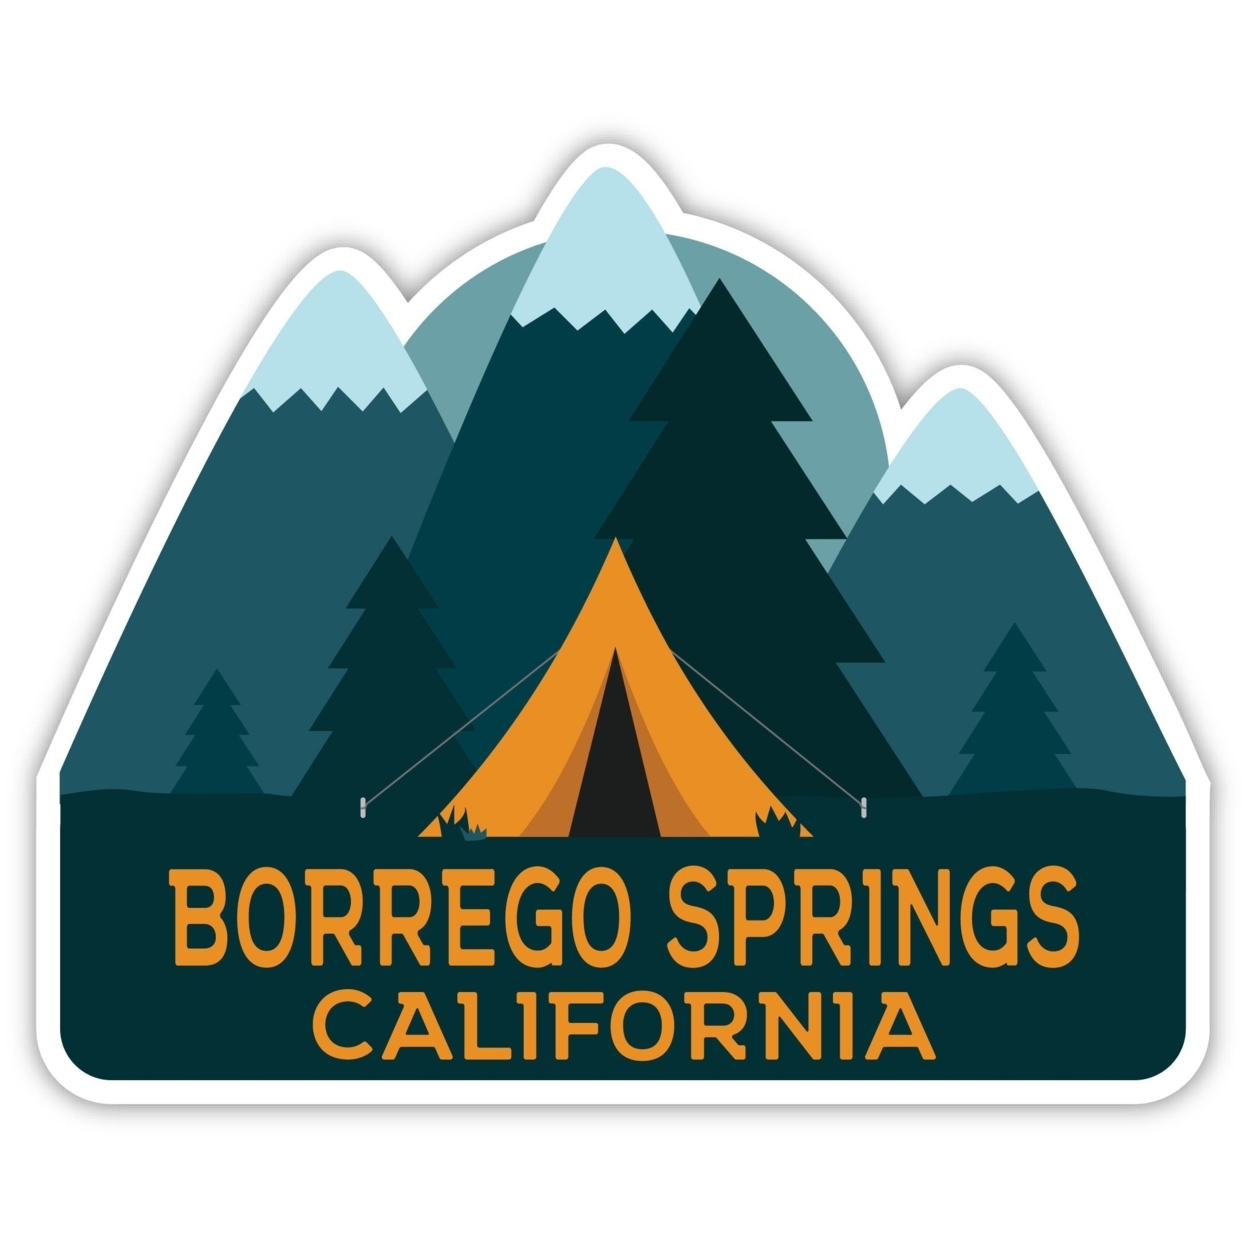 Borrego Springs California Souvenir Decorative Stickers (Choose Theme And Size) - 4-Pack, 6-Inch, Camp Life